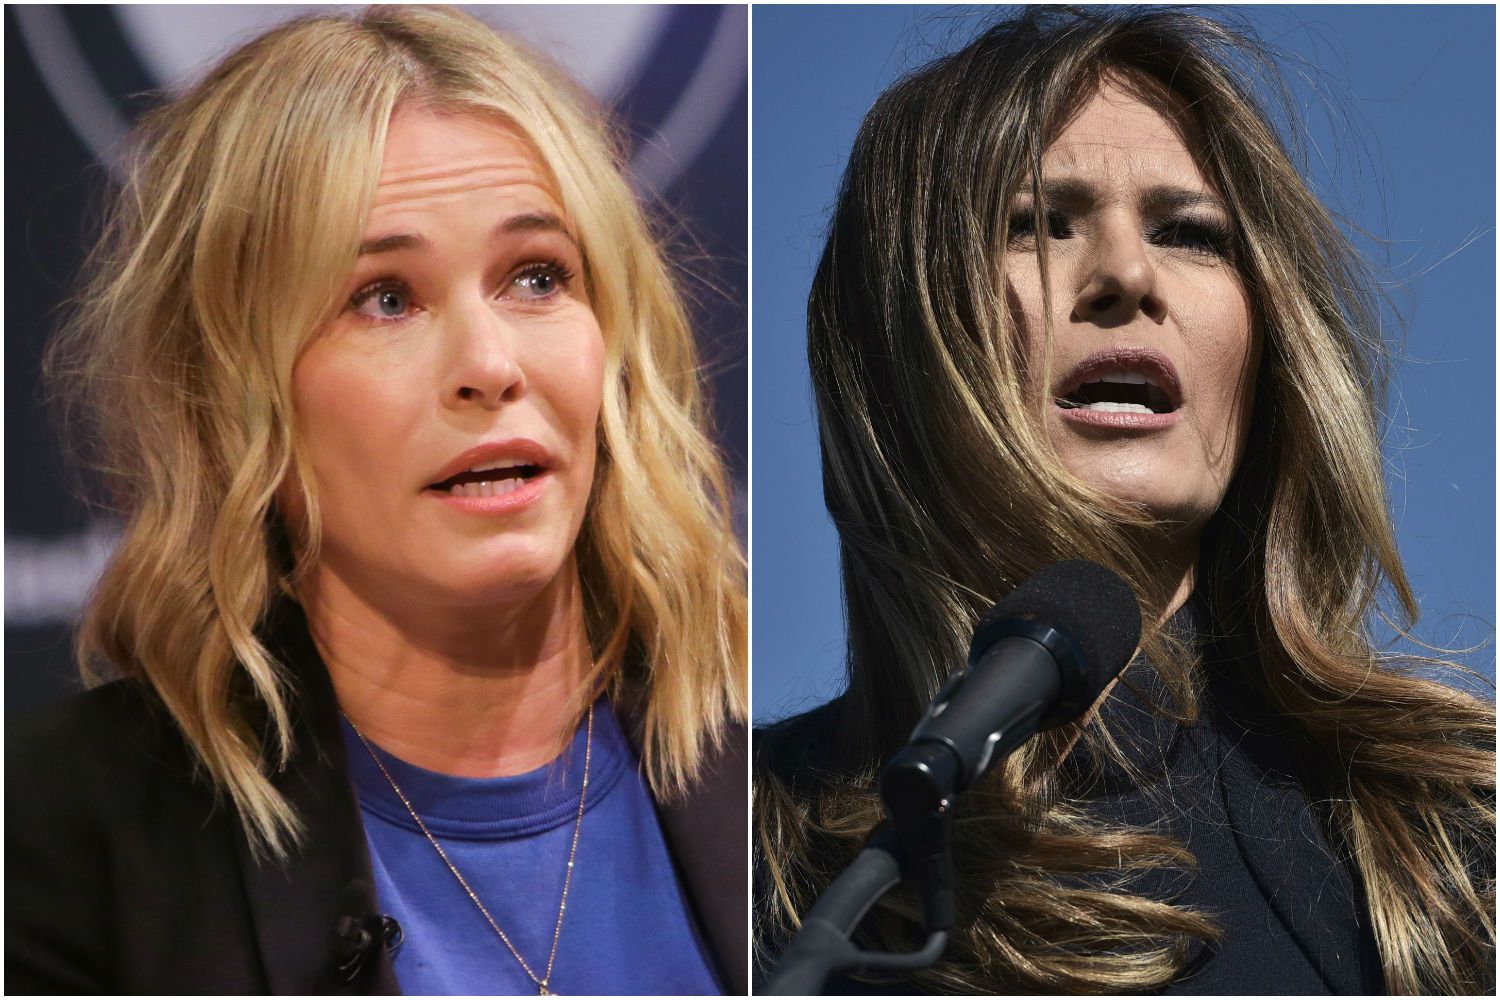 Shade Alert! Chelsea Handler SLAMS Melania Trump, will never Invite the First Lady to her Show